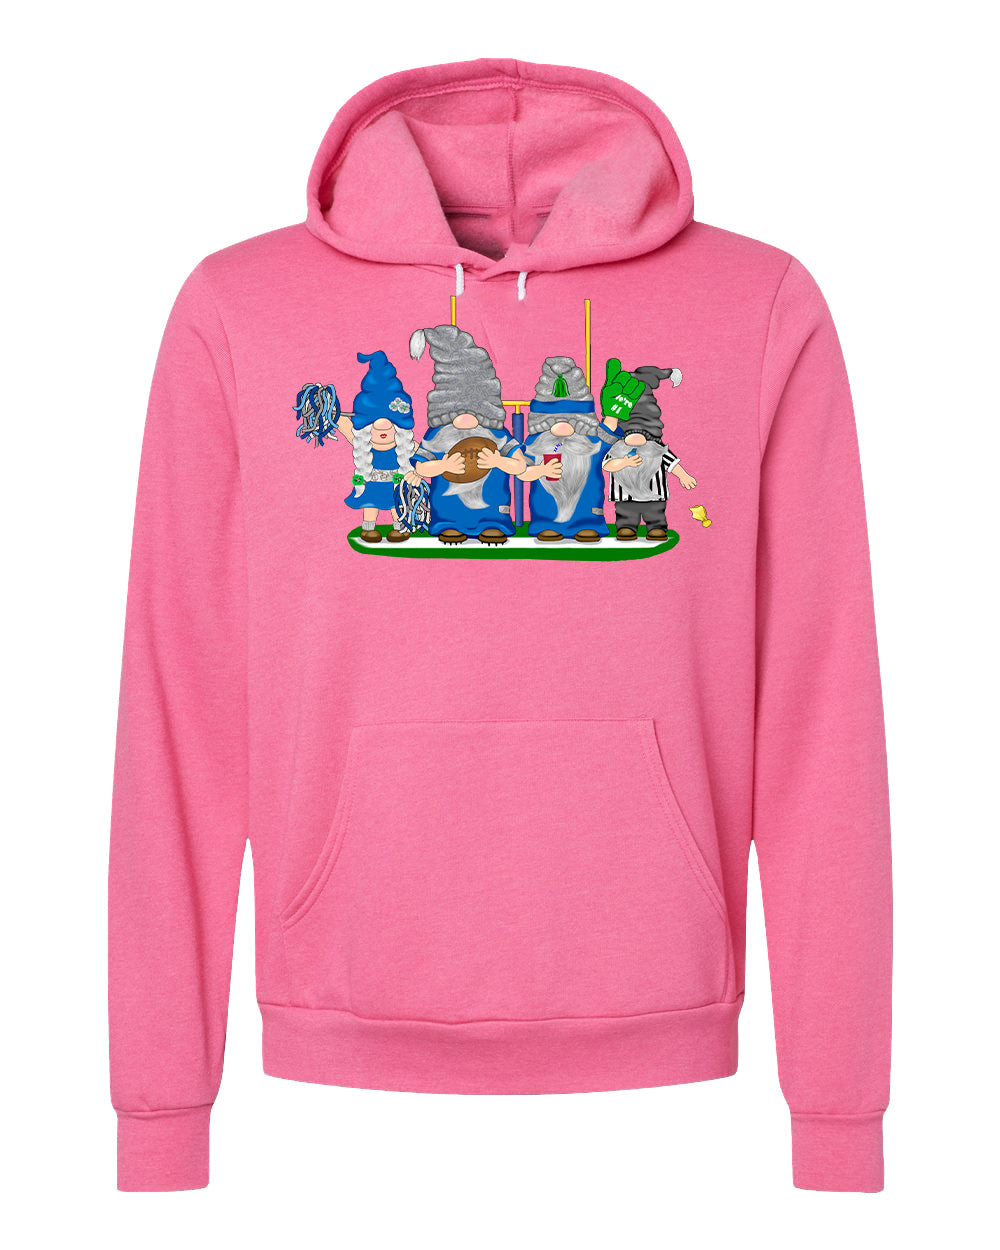 Pacific Blue & Navy Football Gnomes (similar to Seattle) on Unisex Hoodie